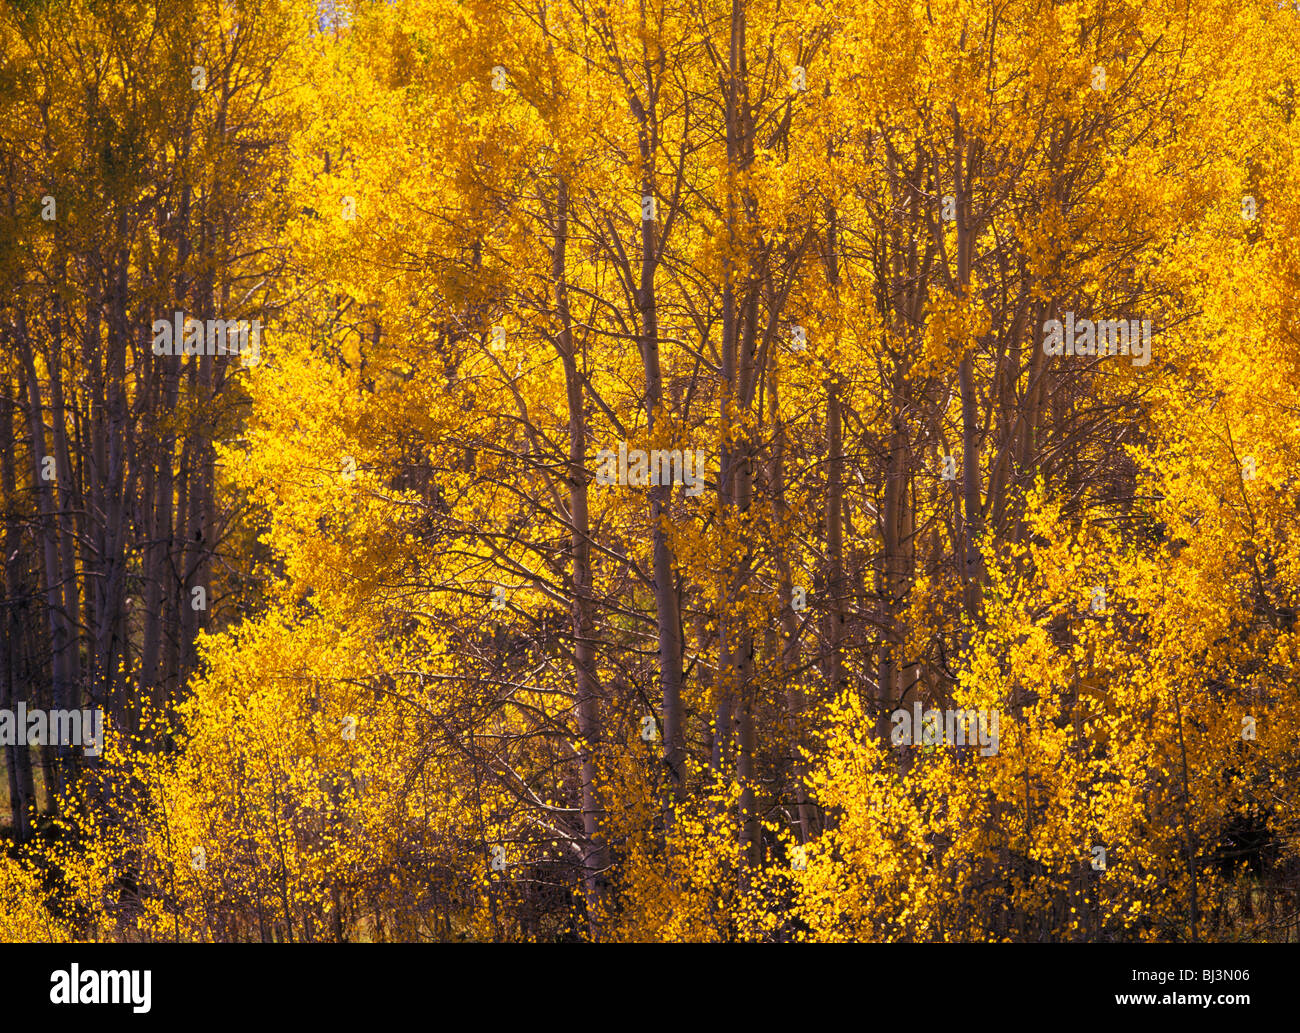 Grove of aspen trees (Populus tremuloides) in backlighted golden fall color, San Juan National Forest, Colorado, USA Stock Photo